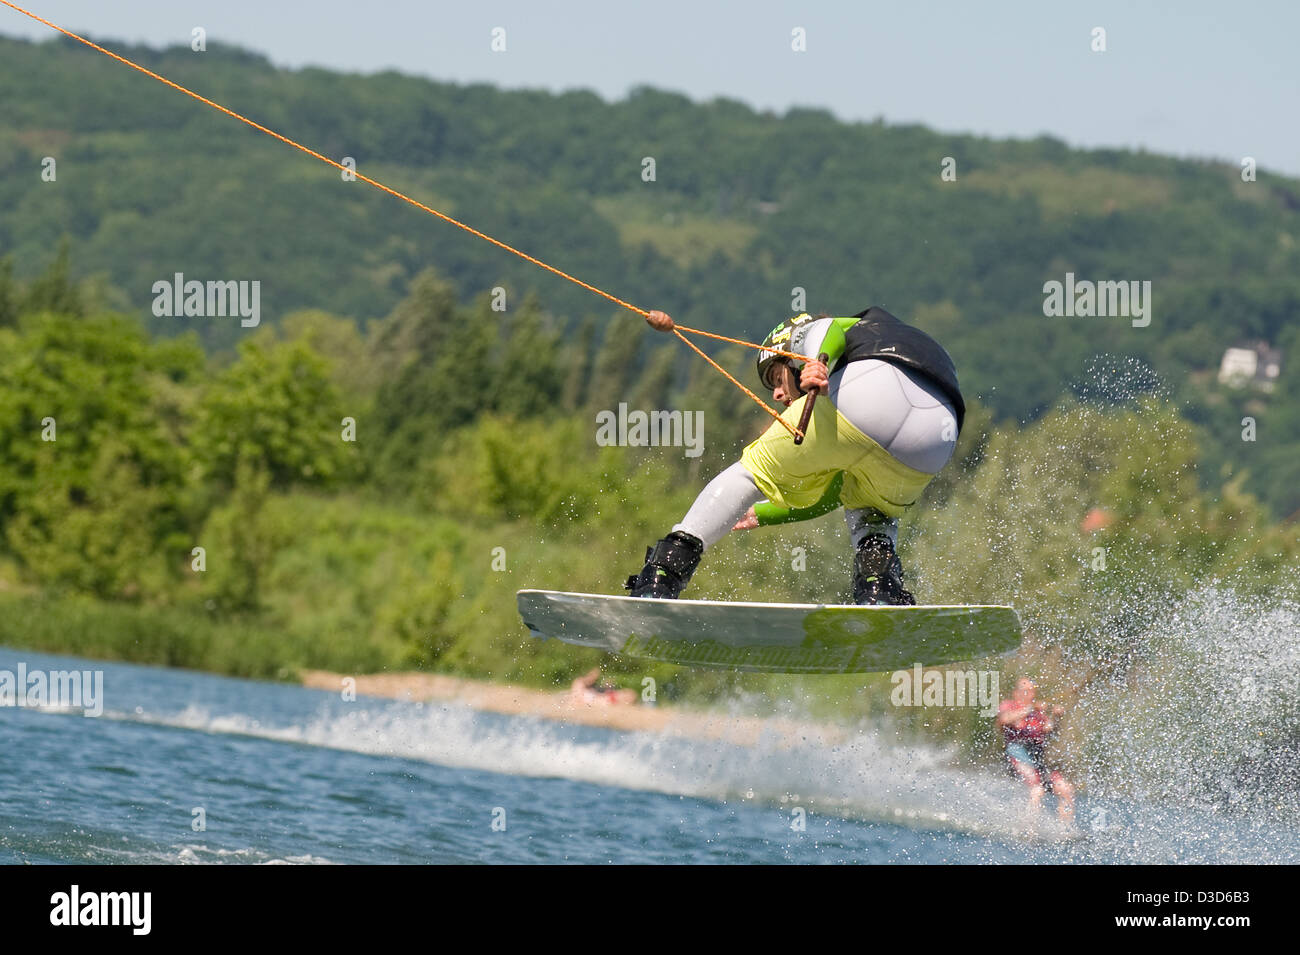 Dresden, Germany, man drives a wakeboard on a lake Stock Photo